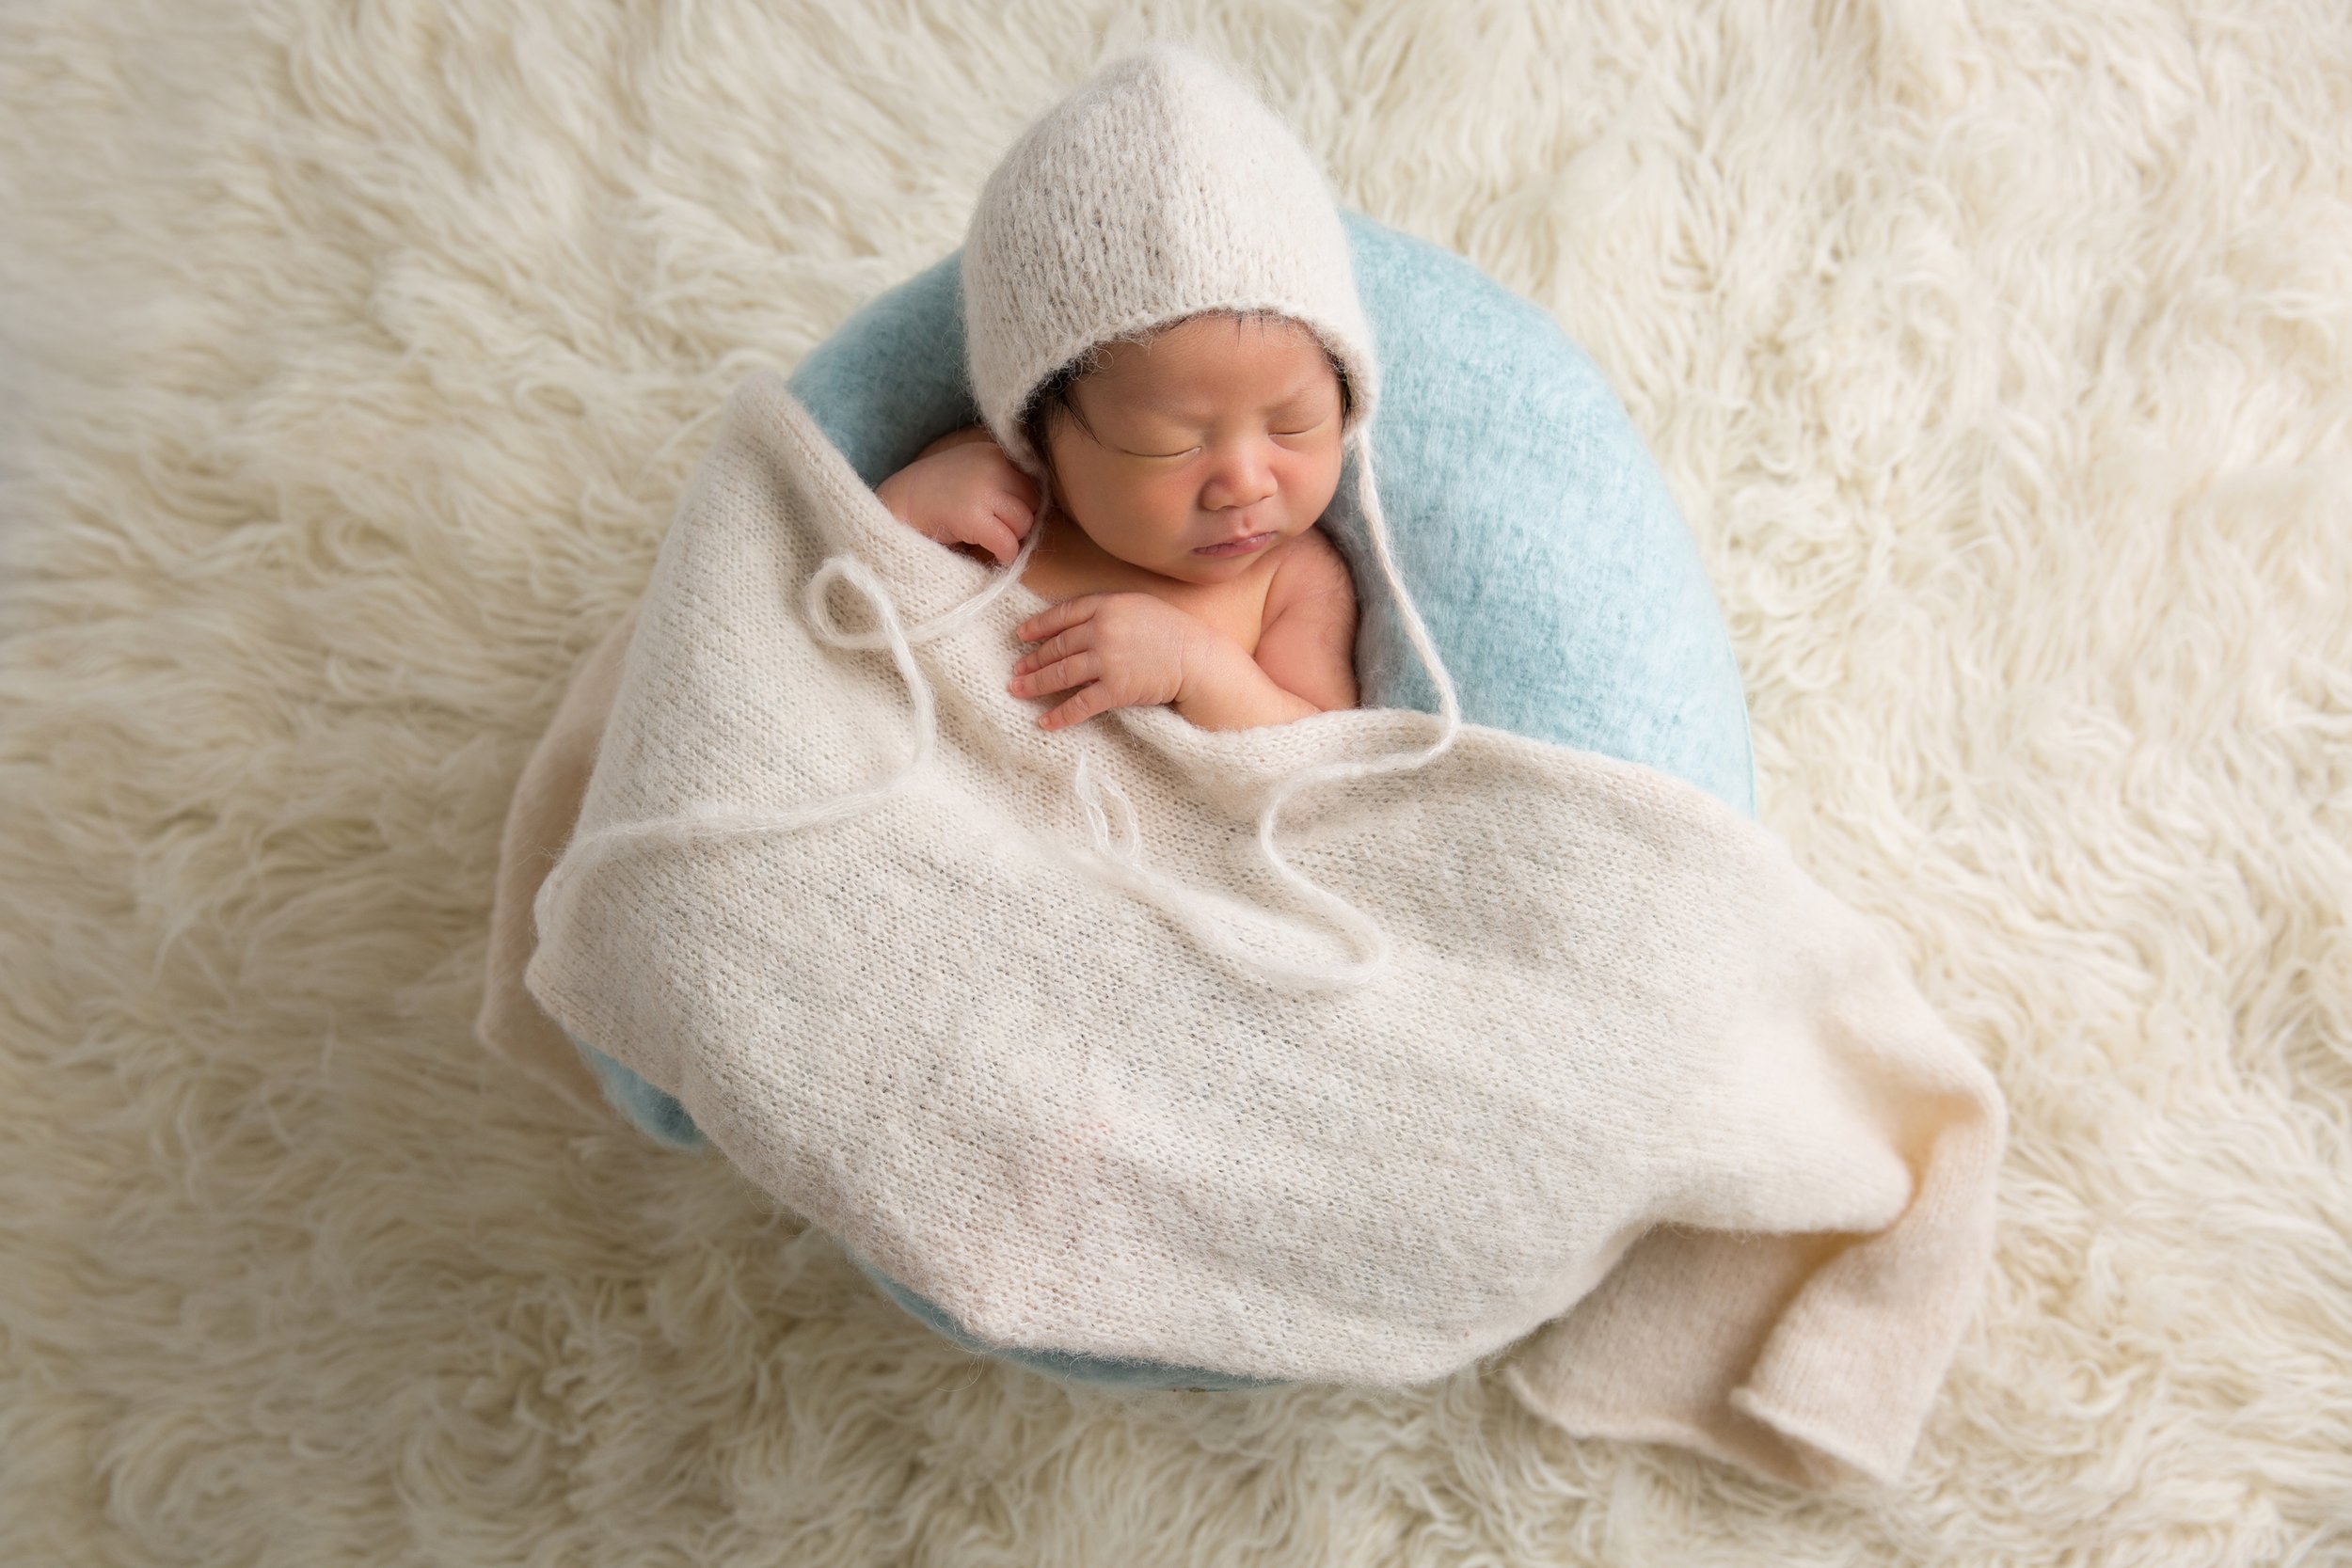 Newborn photographers that come to your home in Virginia Water